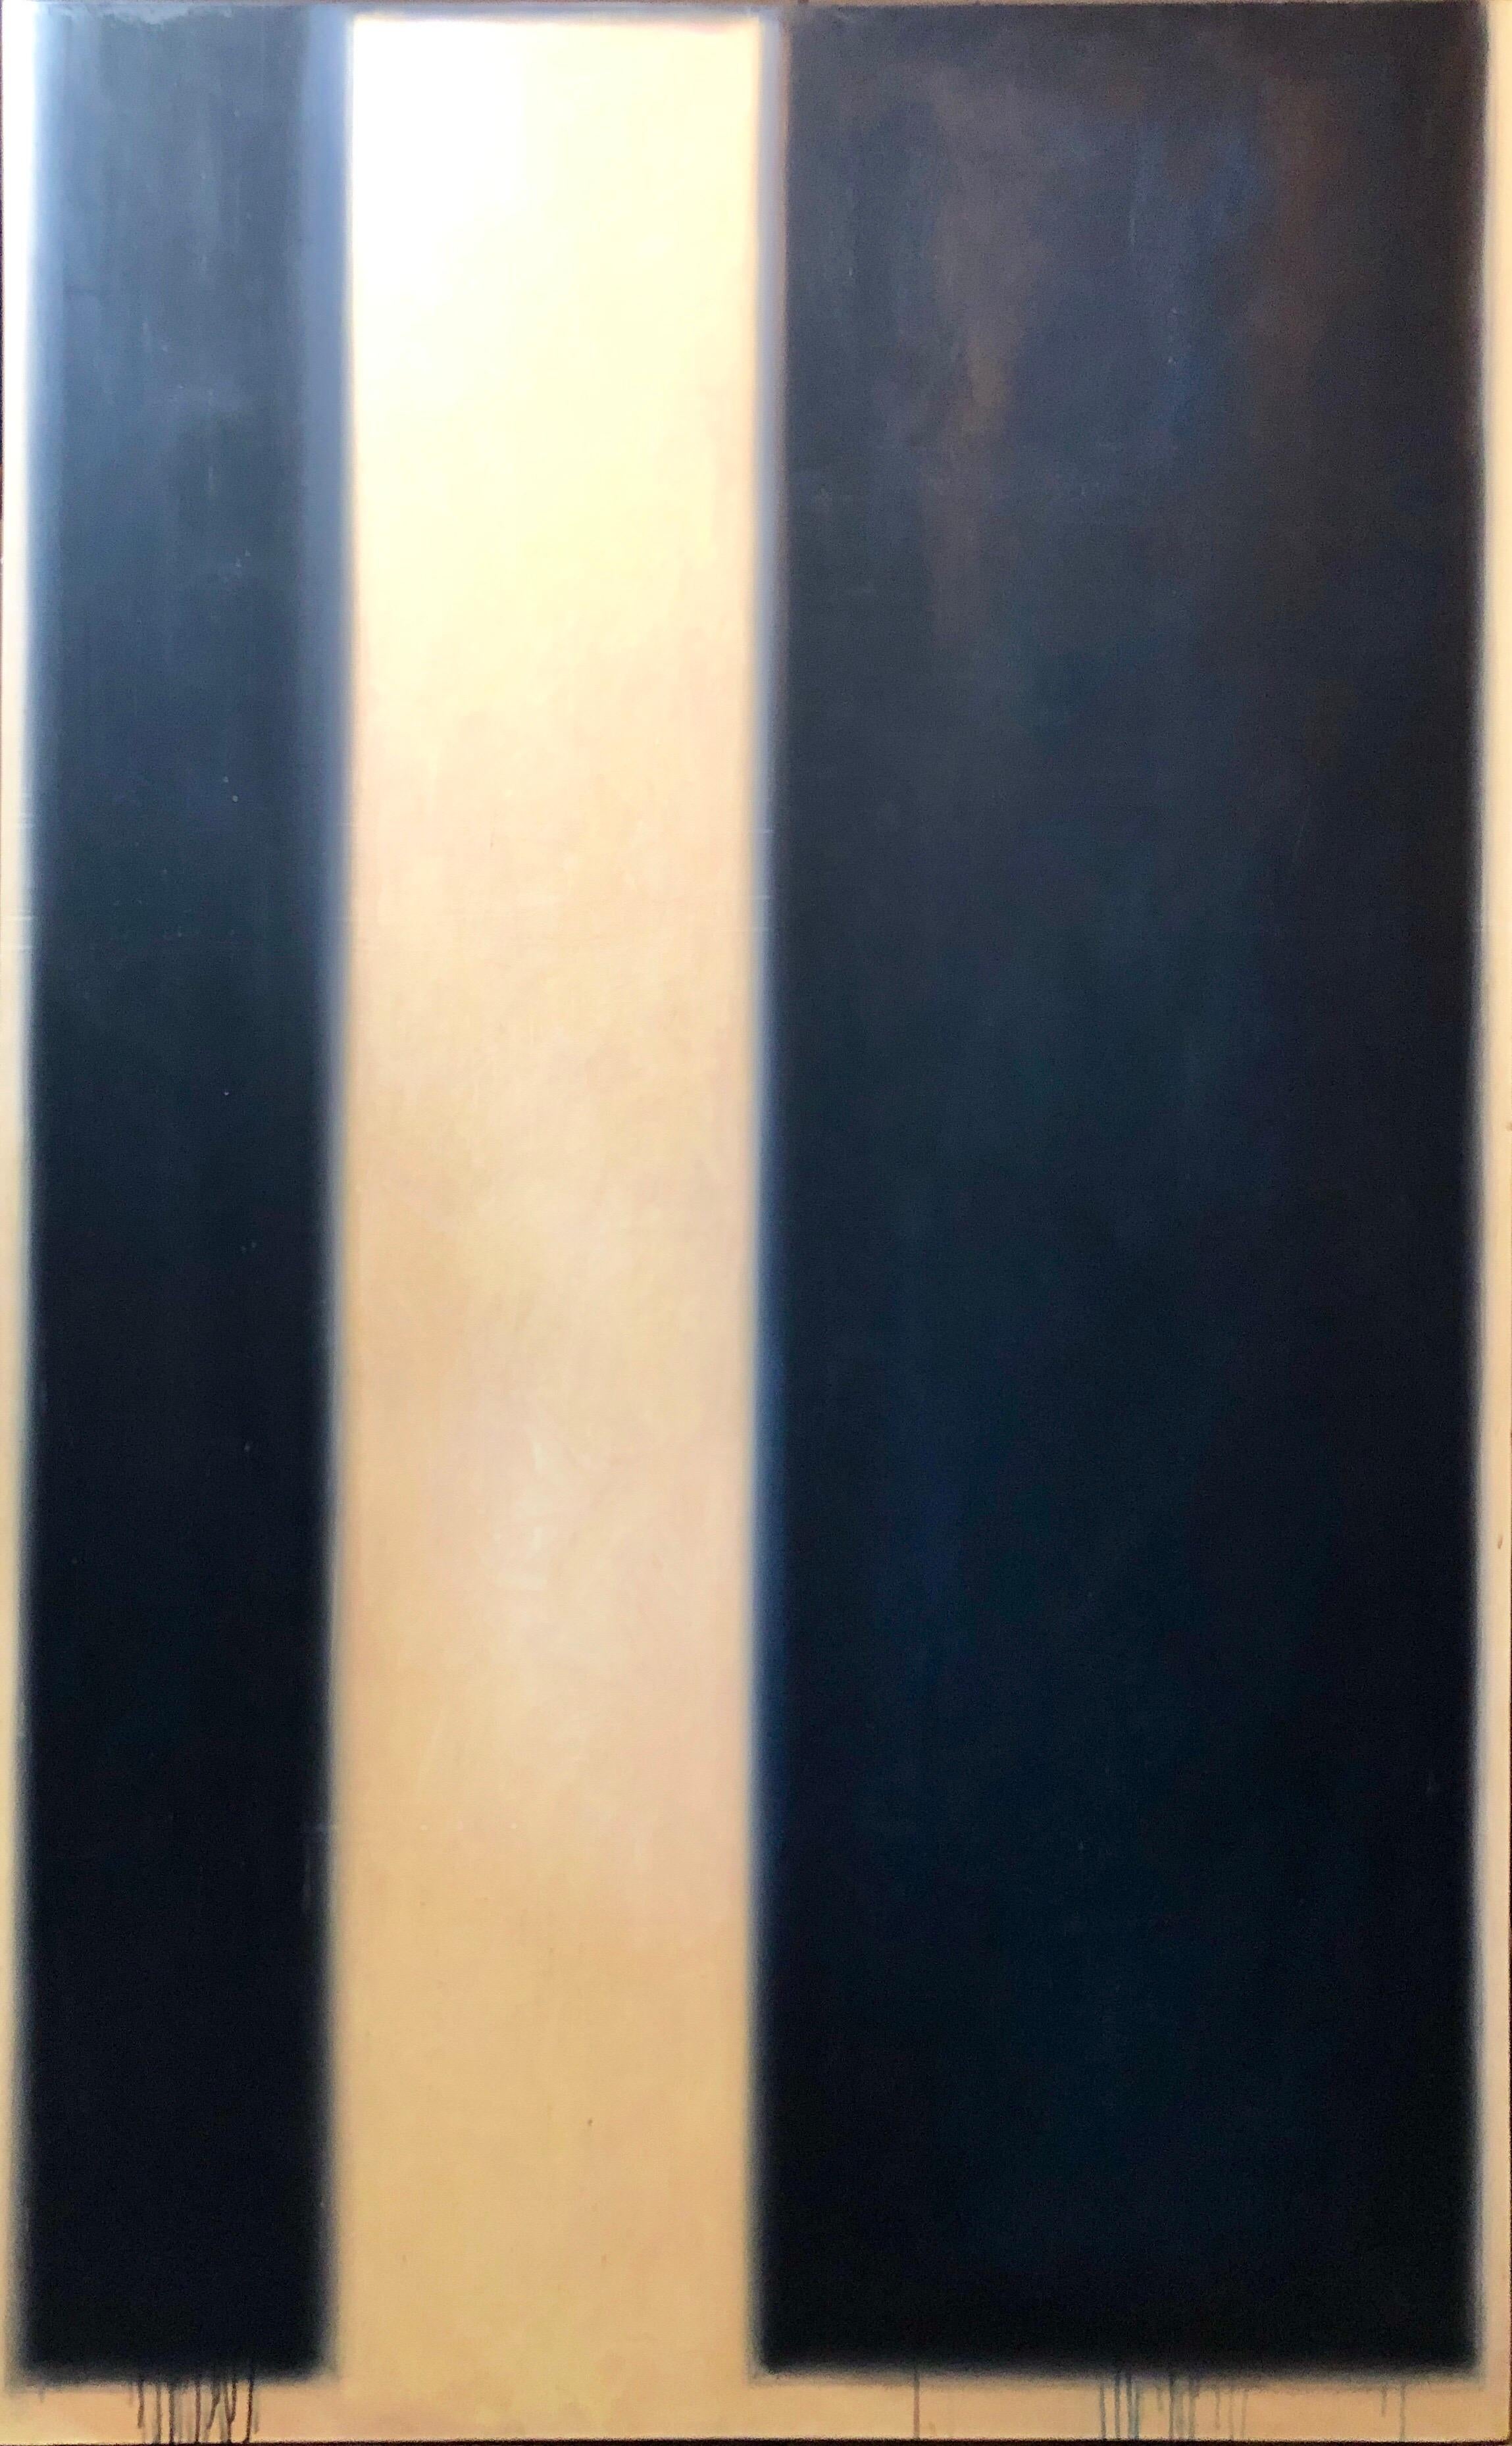 Huge 8' California Minimalist Abstract Expressionist LA Color Field Oil Painting - Black Abstract Painting by Peter Lodato